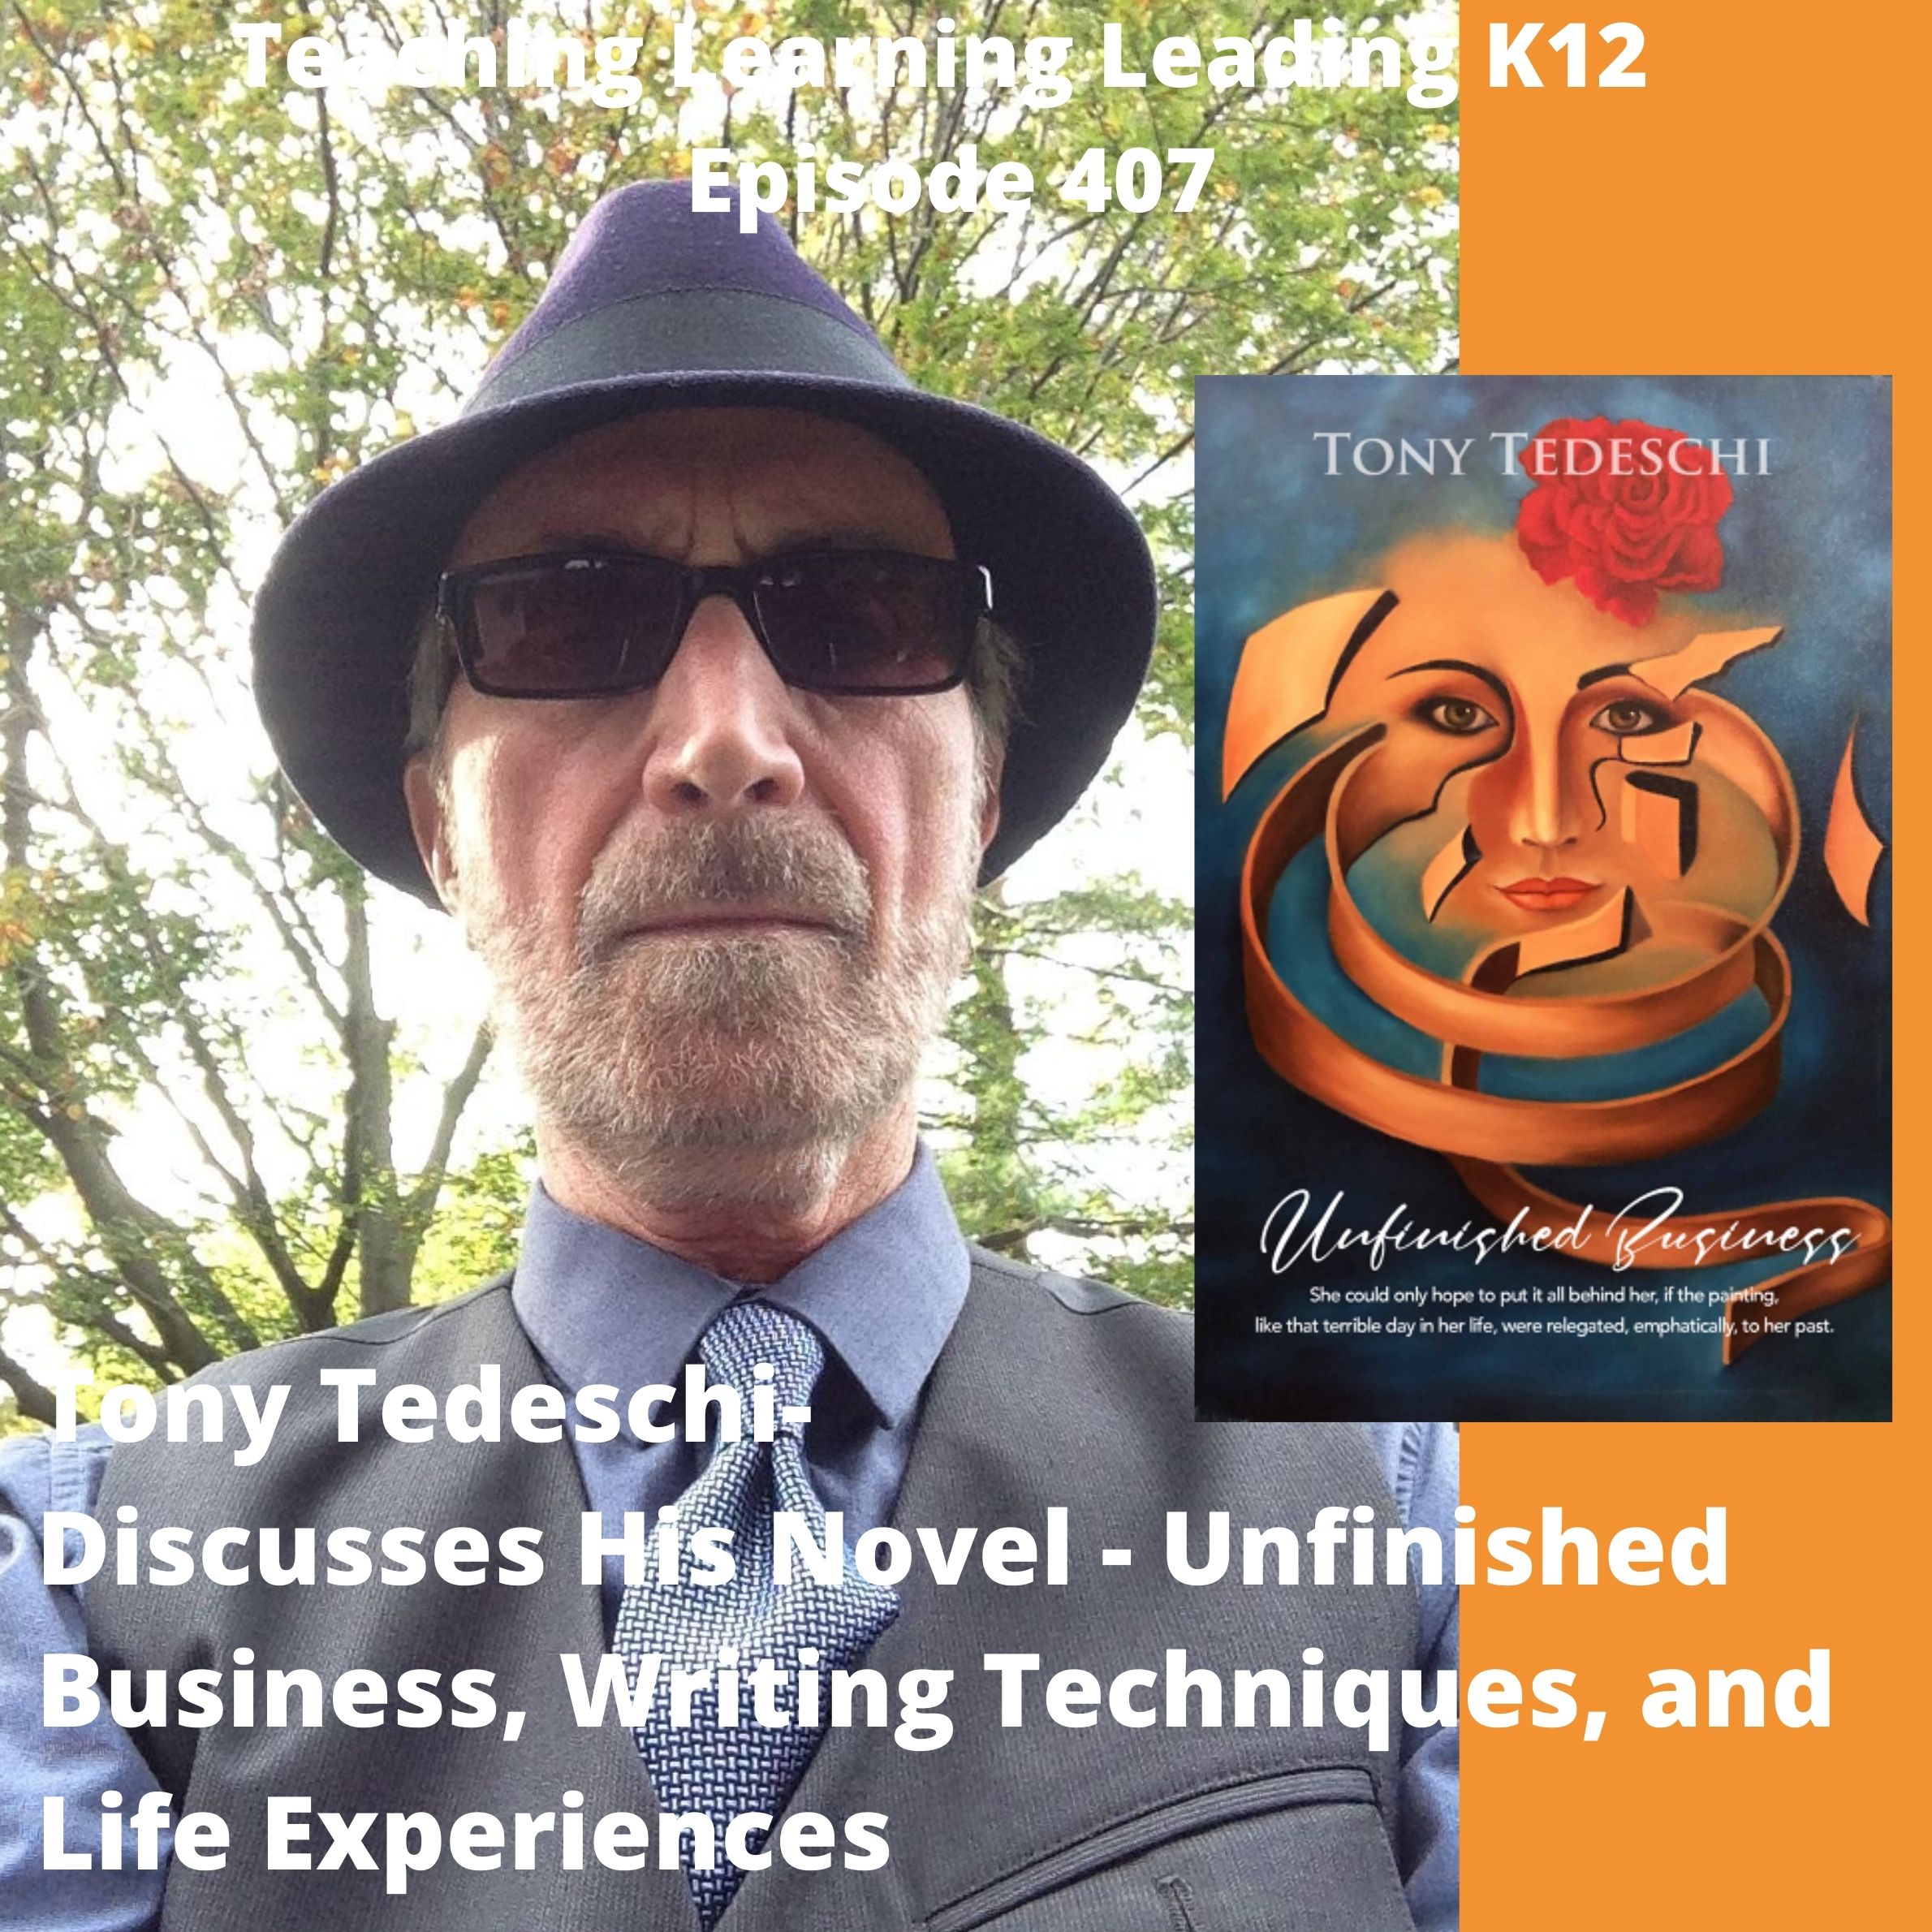 Tony Tedeschi - Talks about his novel - Unfinished Business, Writing Techniques, and Life Stories - 407